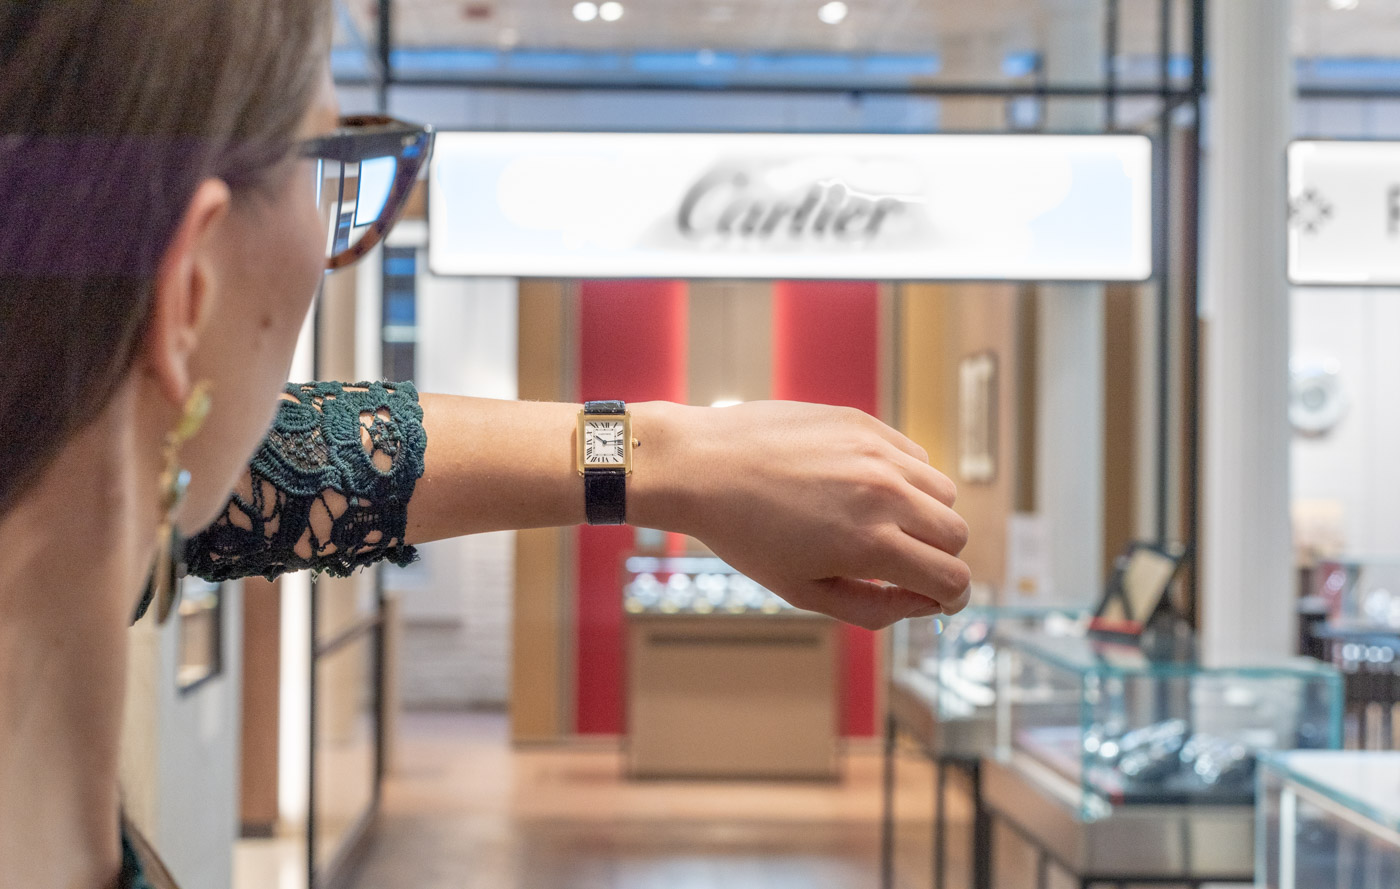 Opening Our Doors To The New Cartier Boutique At Resorts World Sentosa -  Swiss Watch